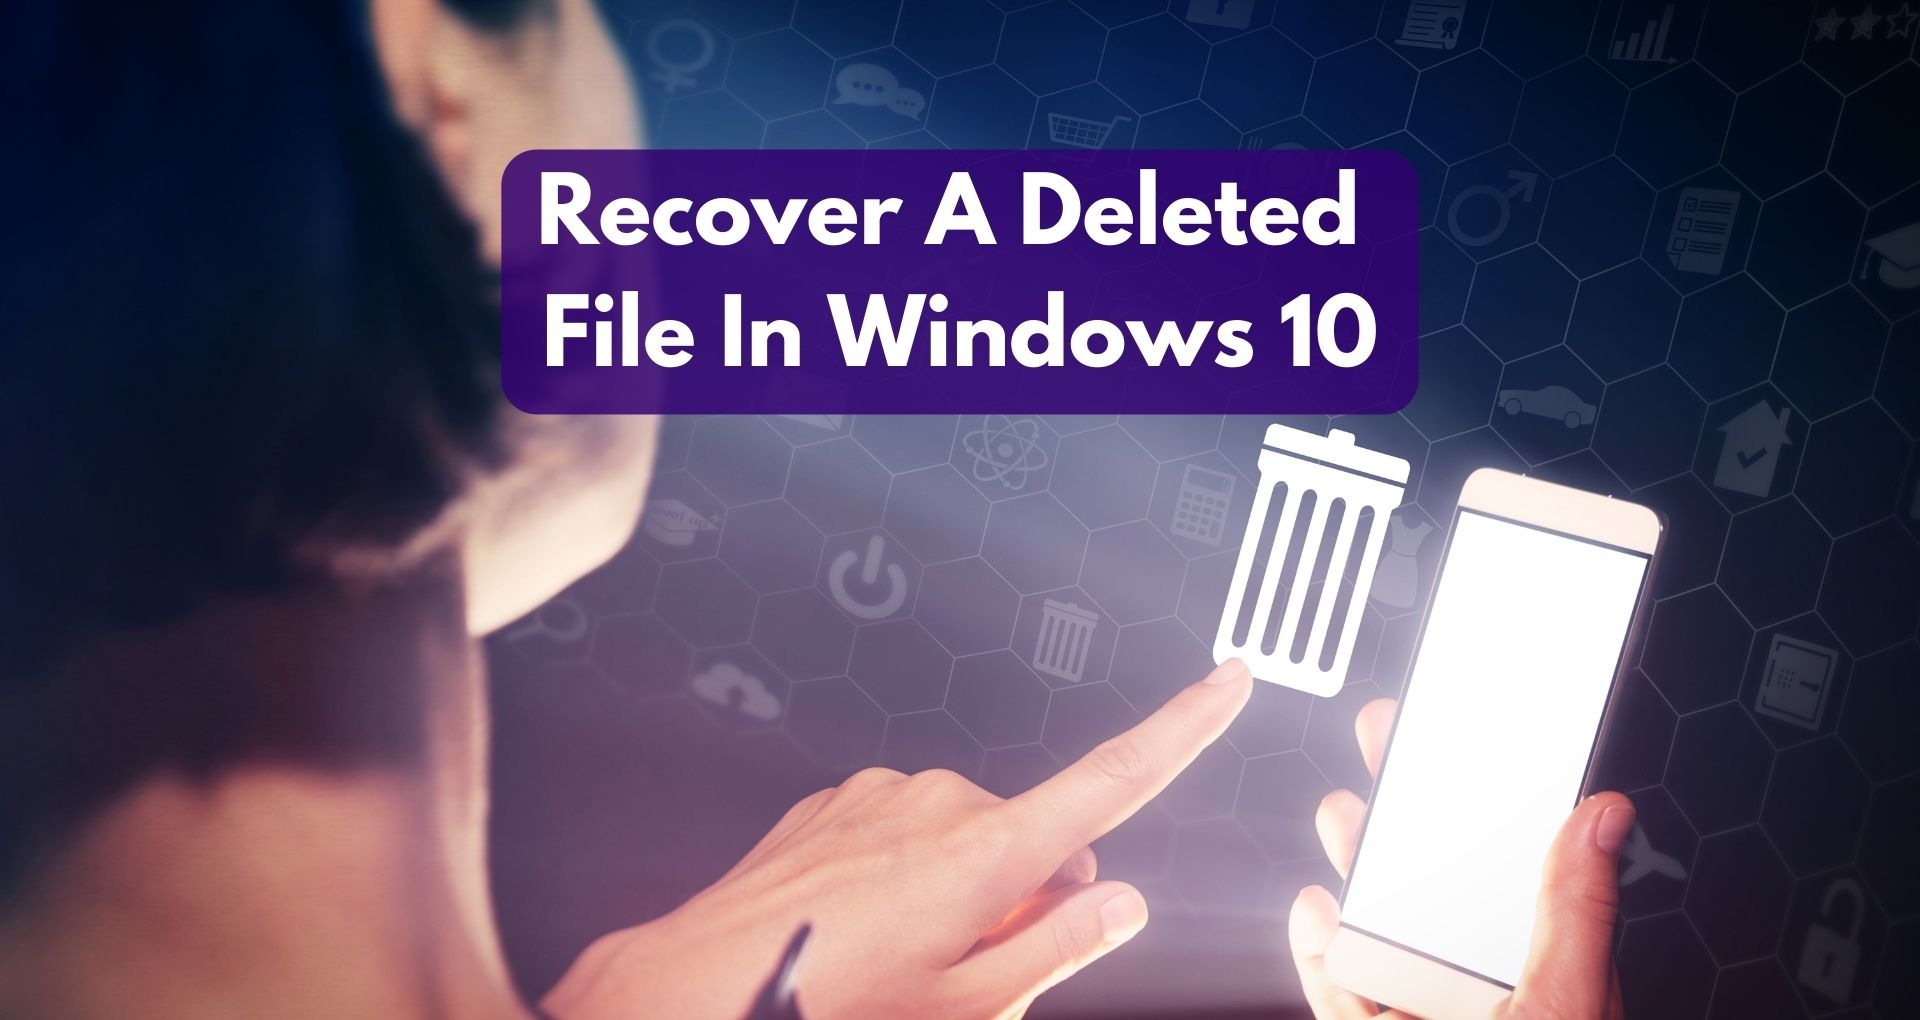 How To Recover A Deleted File In Windows 10?